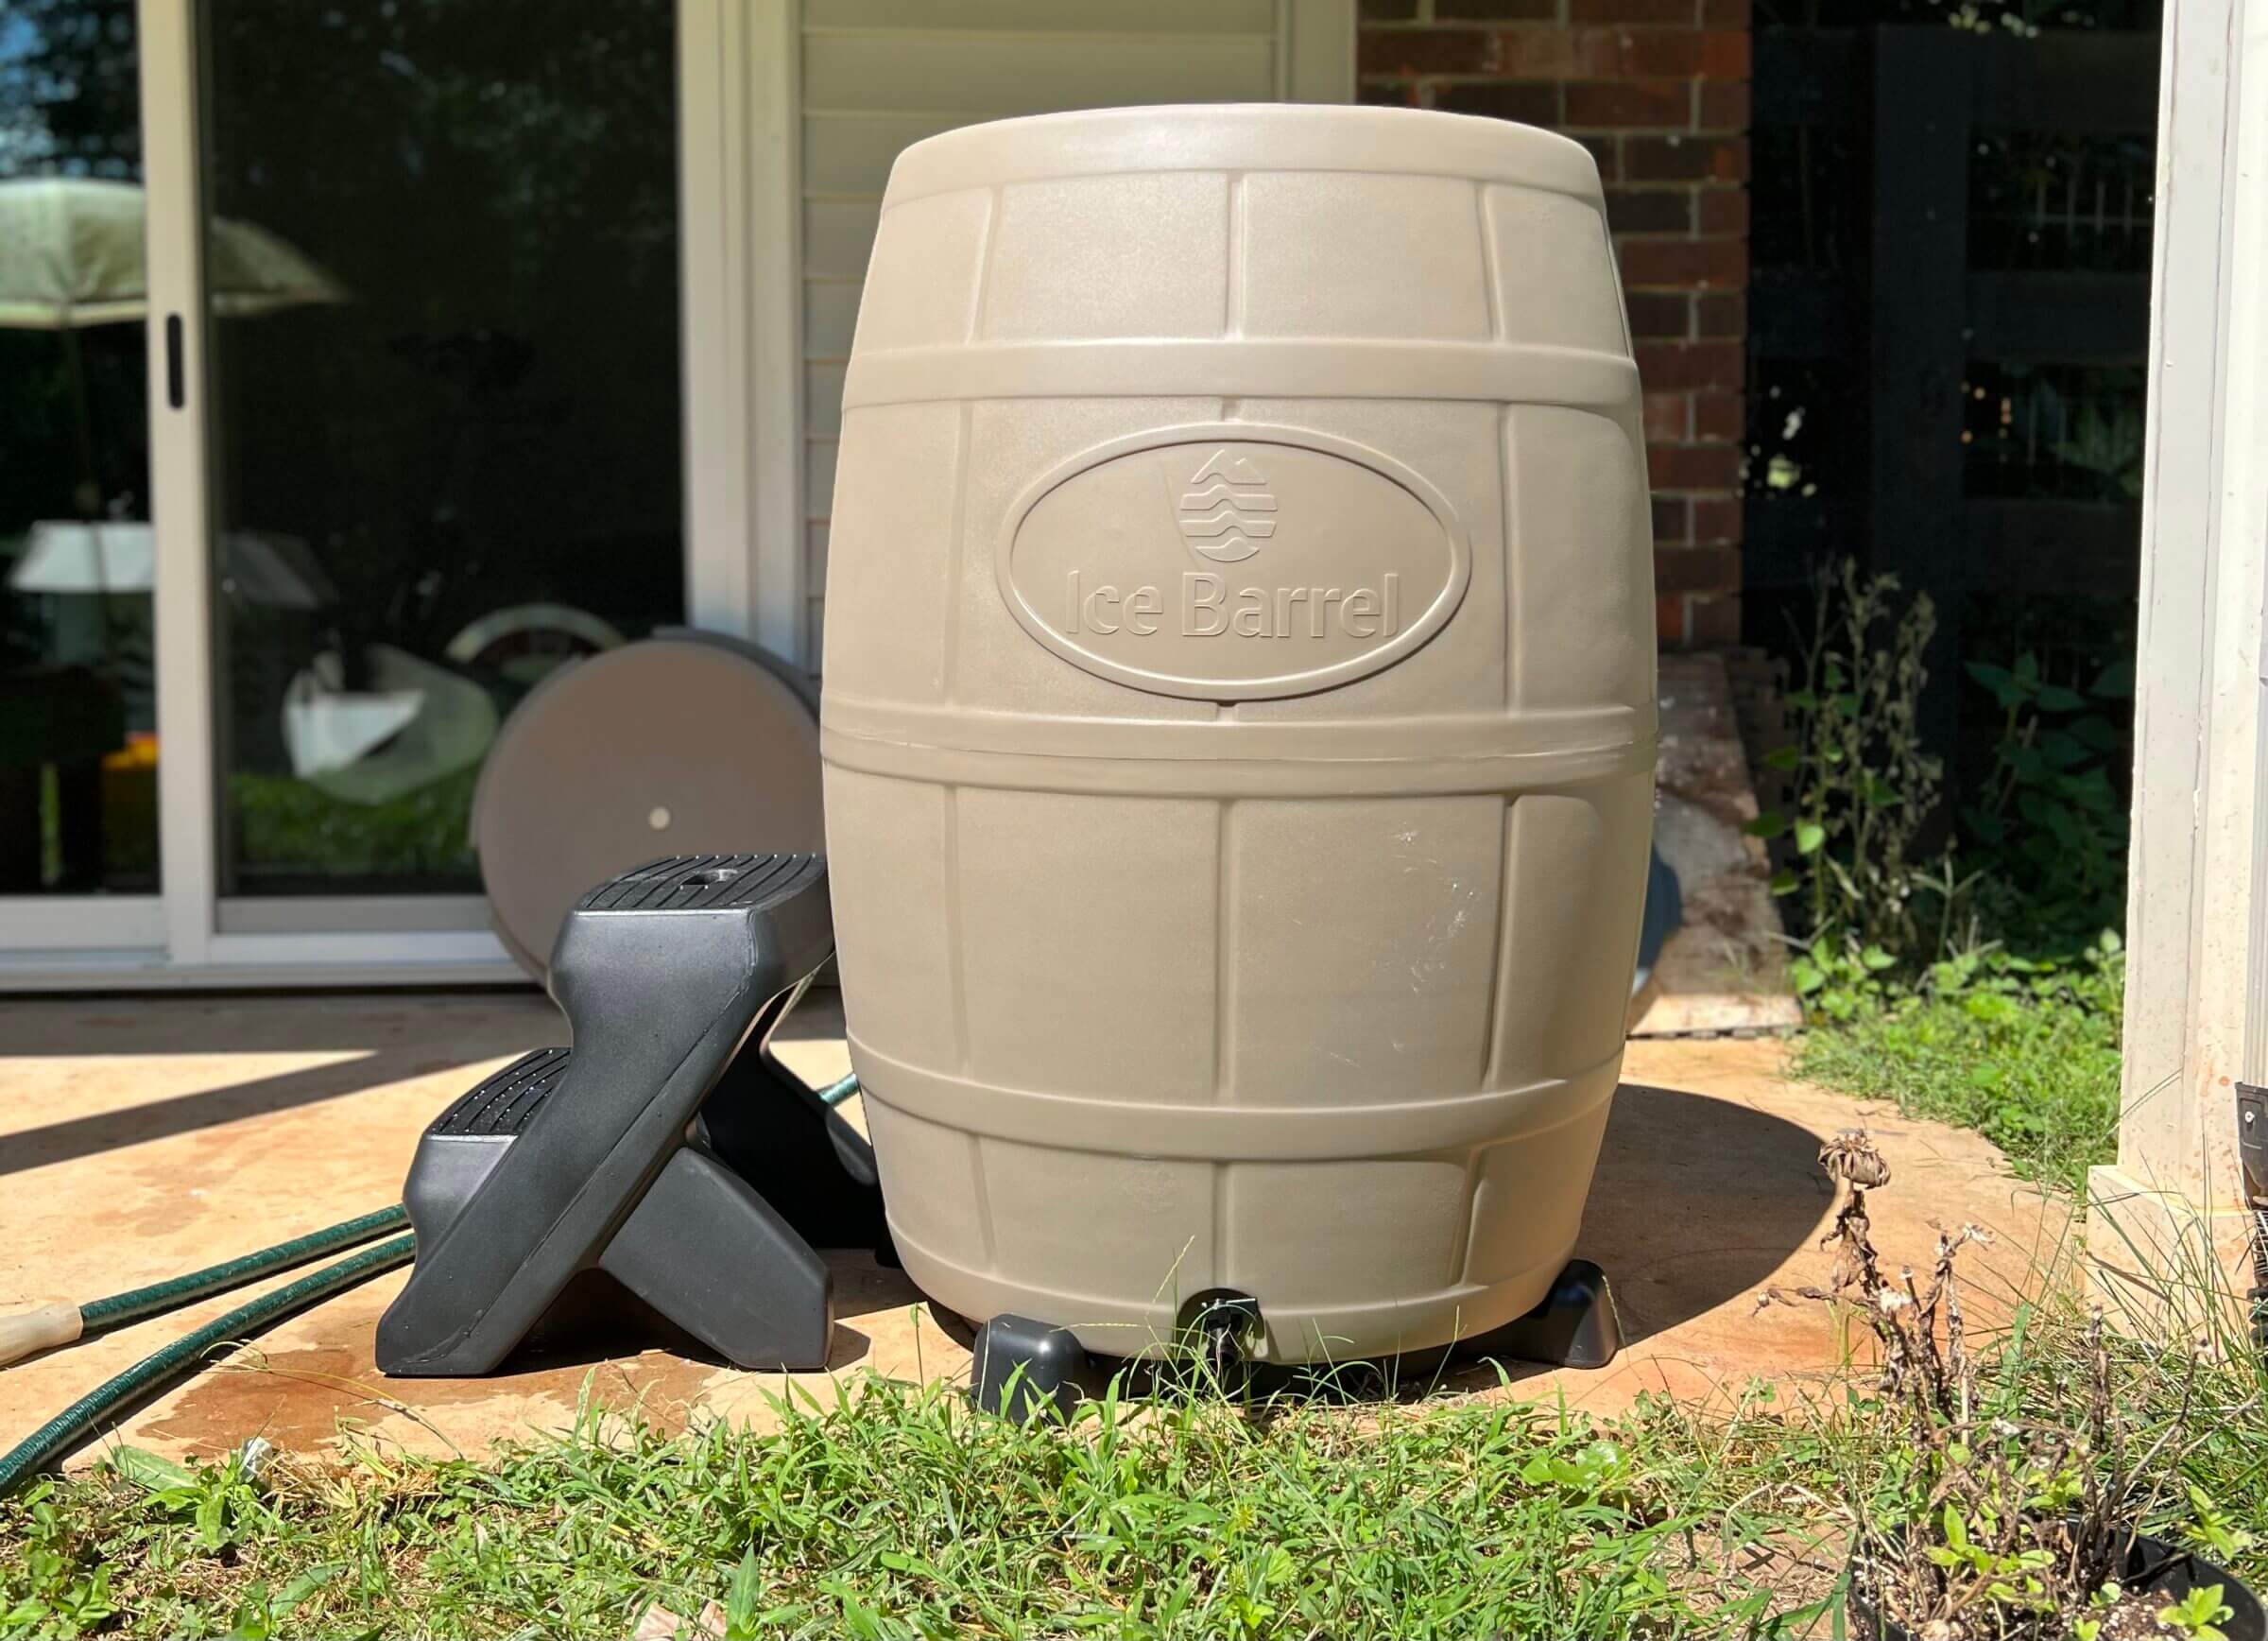 Some people may disagree, but I think the Ice Barrel is a great fit for any backyard.